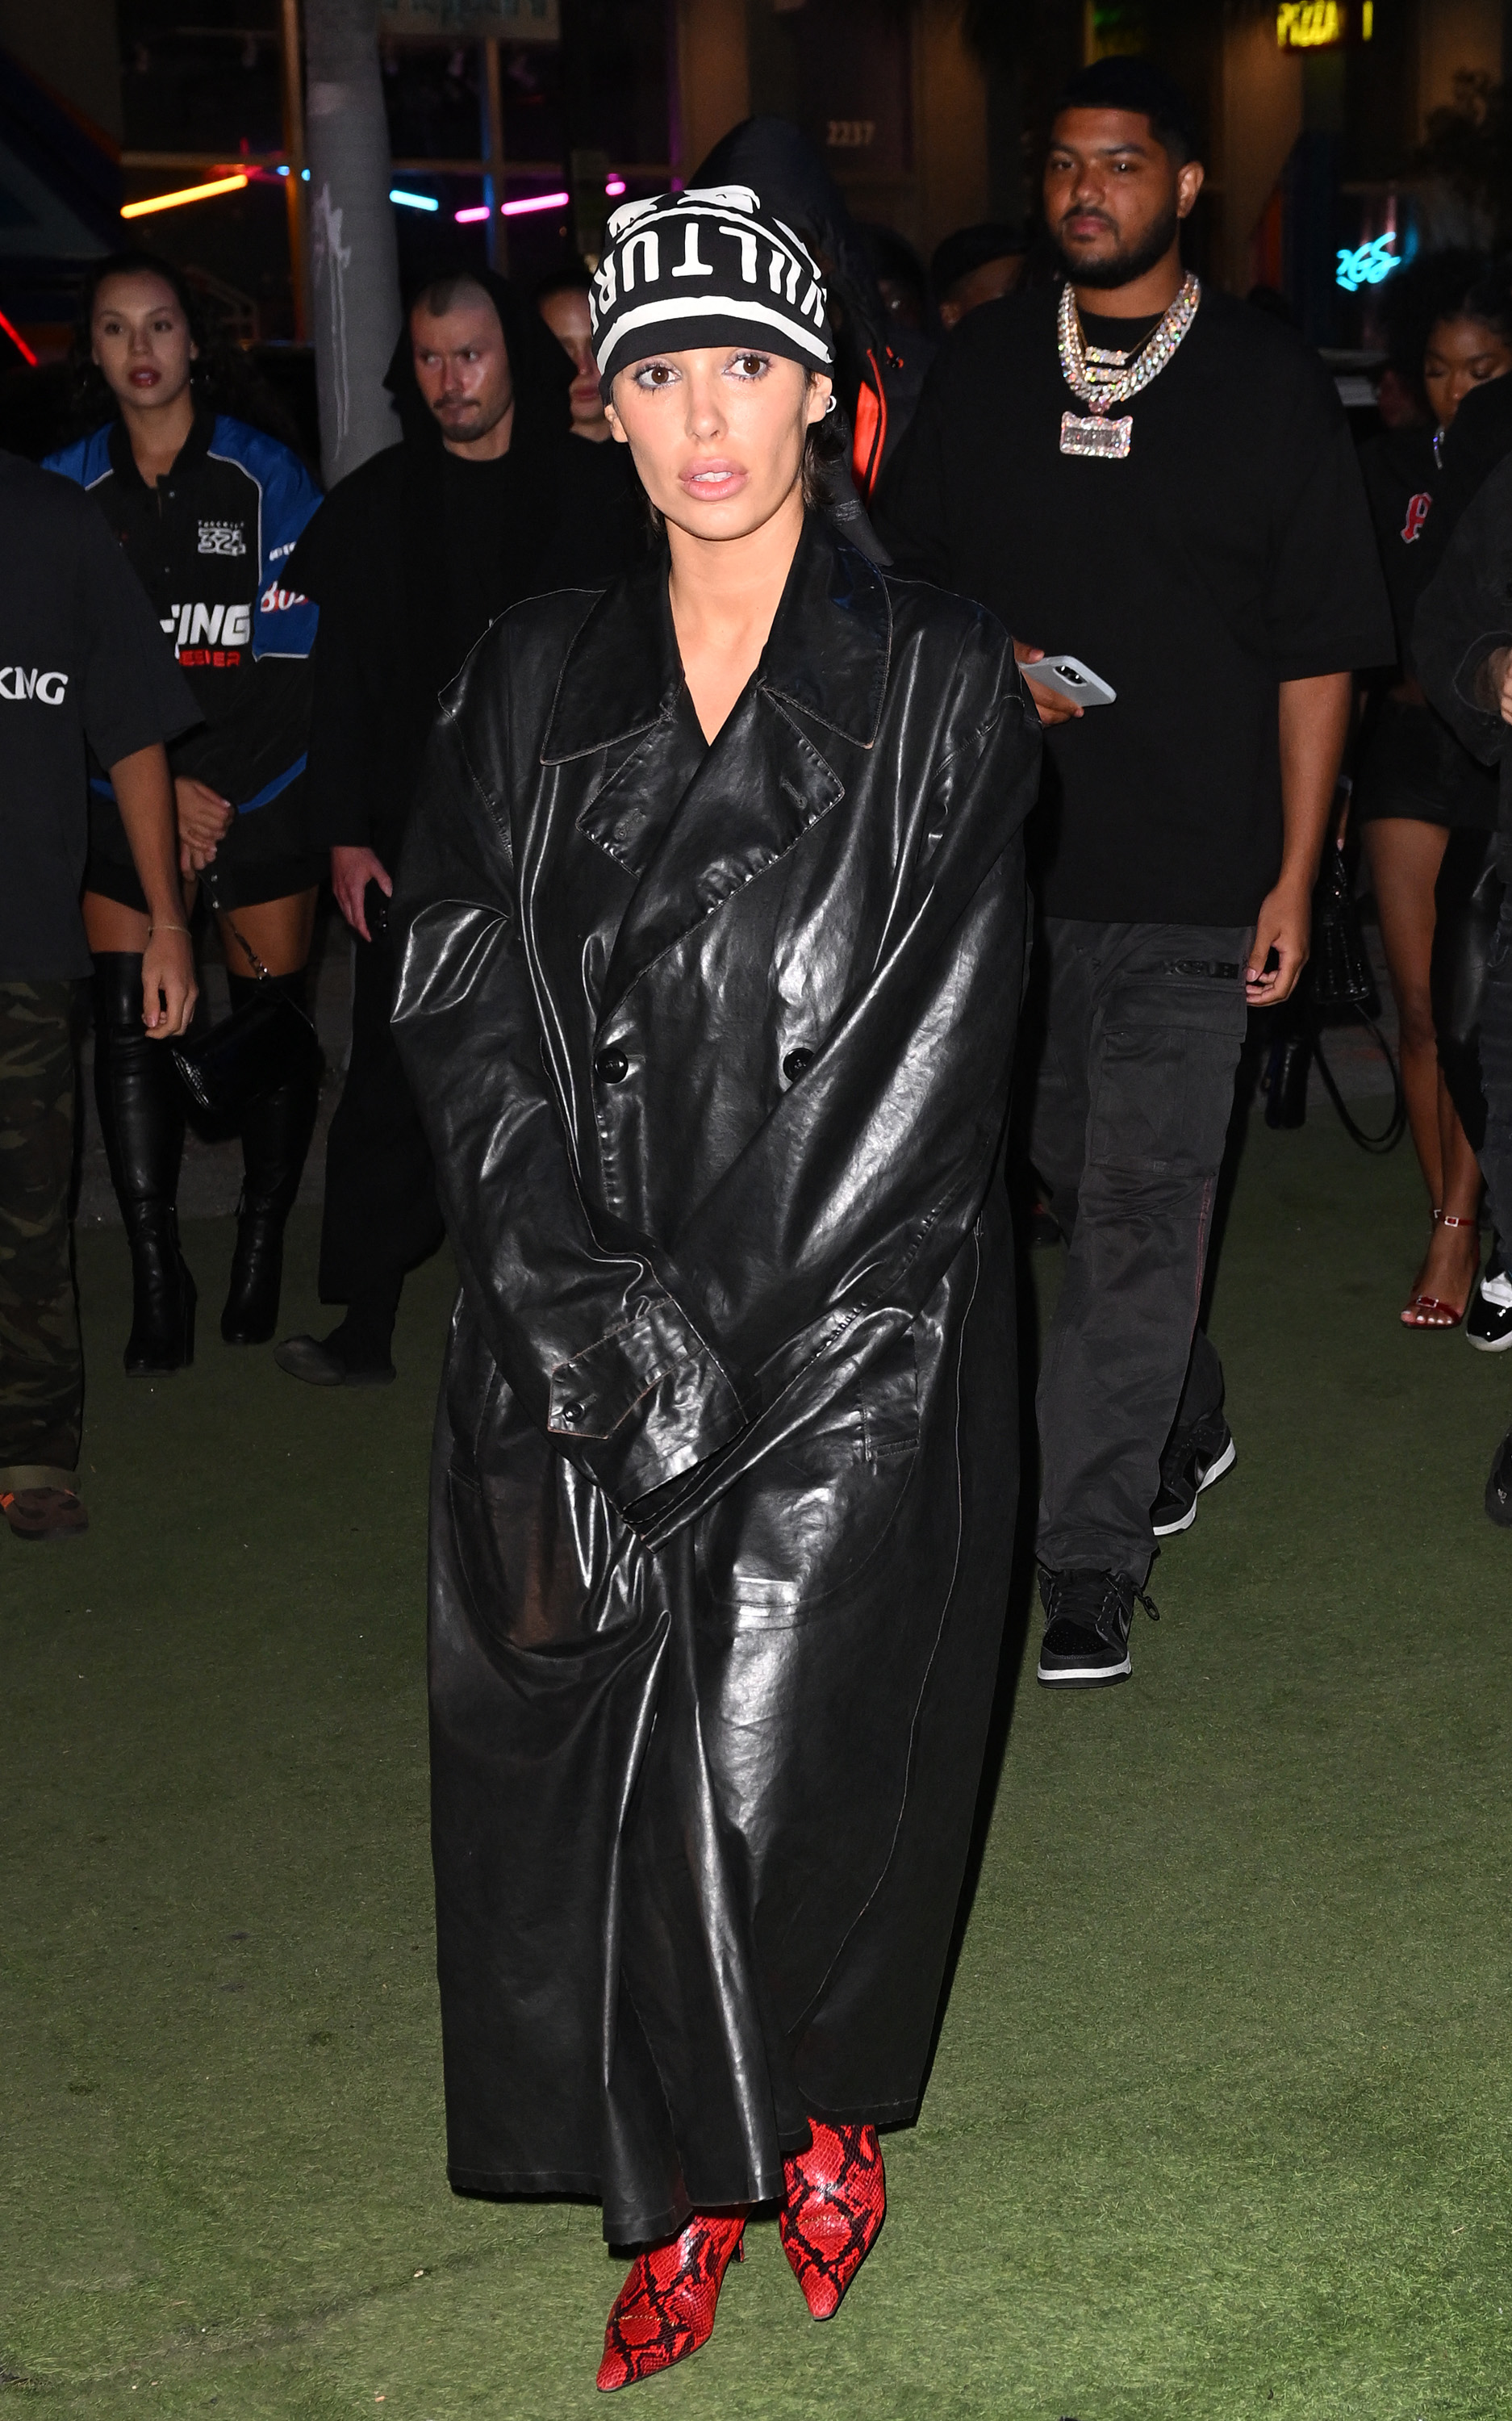 Kim's outfit appeared to be a copy of Bianca's oversized black trench coat